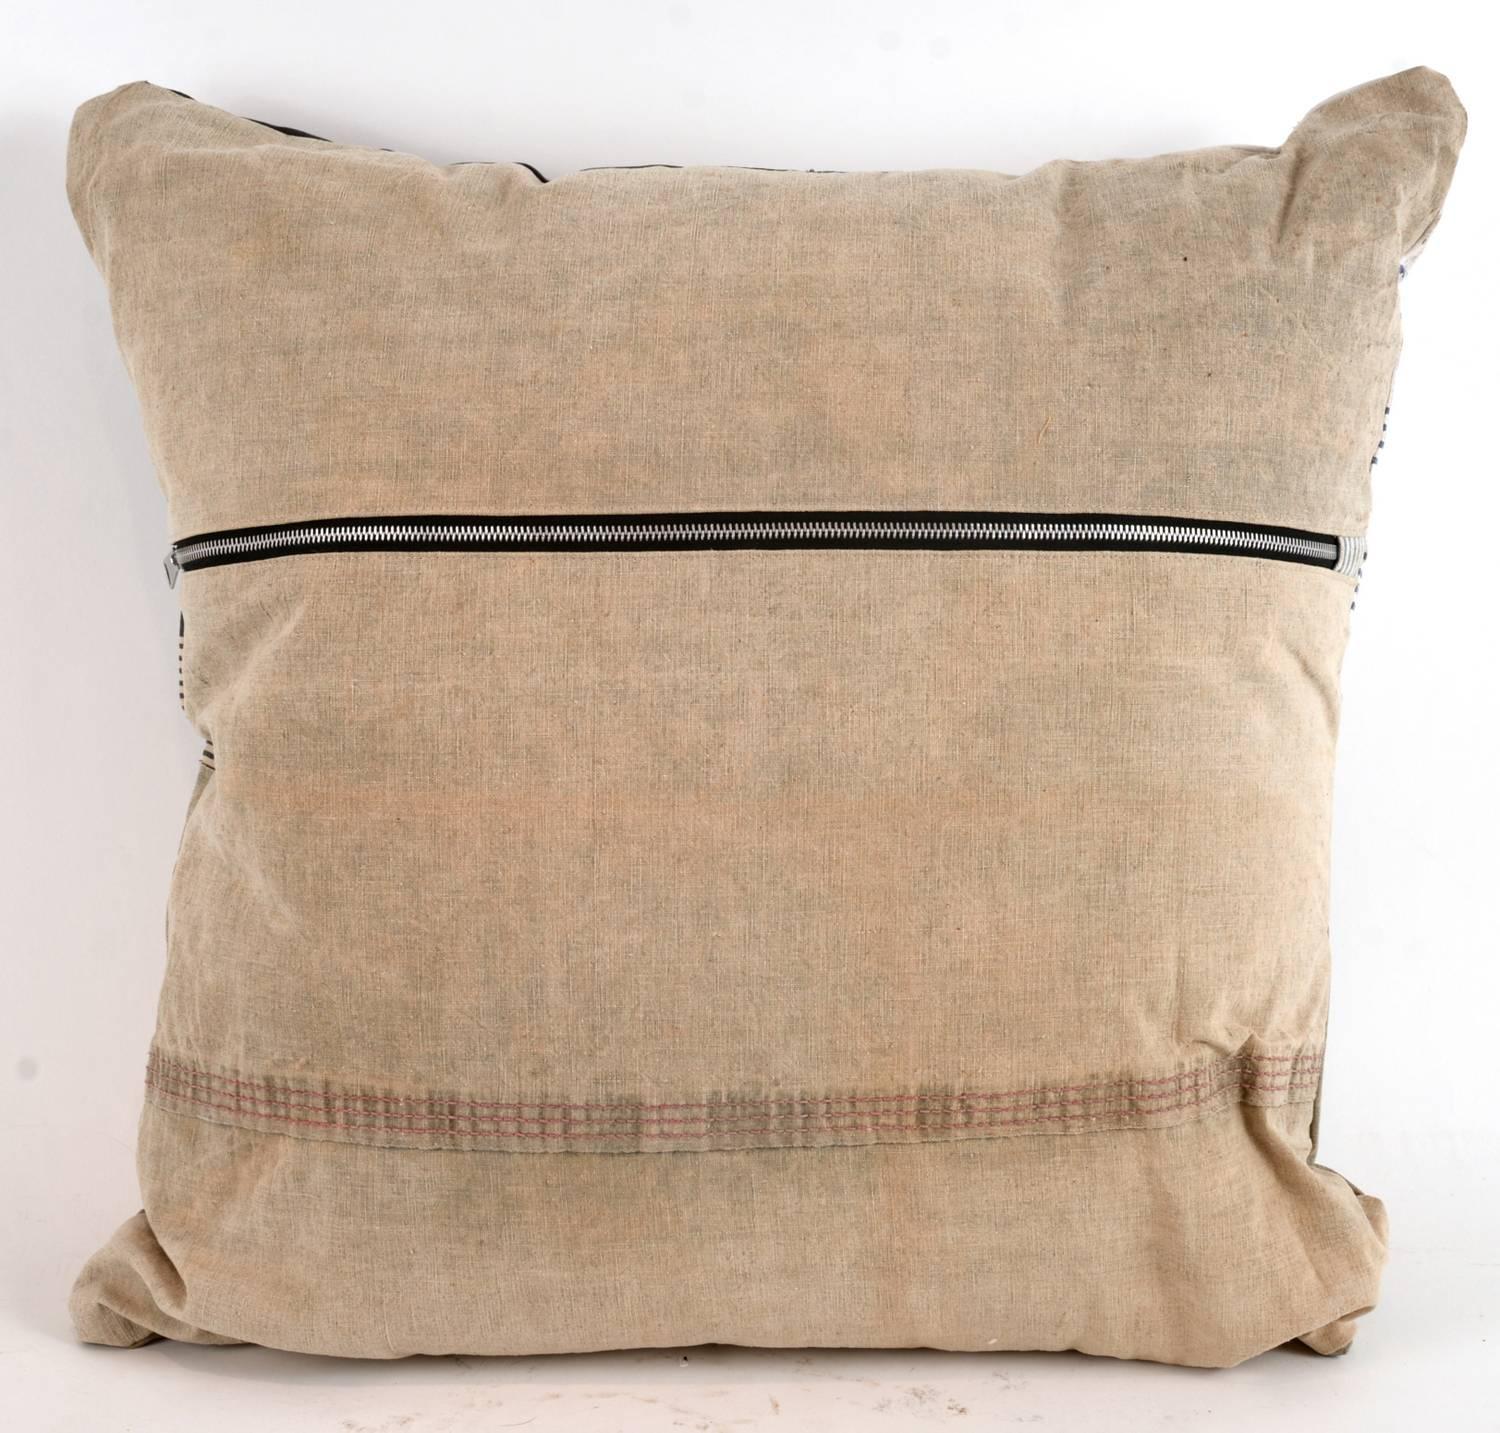 These pillows have a perfectly relaxed look including expected wear and tear to the vintage material. This is intentional and we believe it adds to the beauty and unique character of pillow.


 